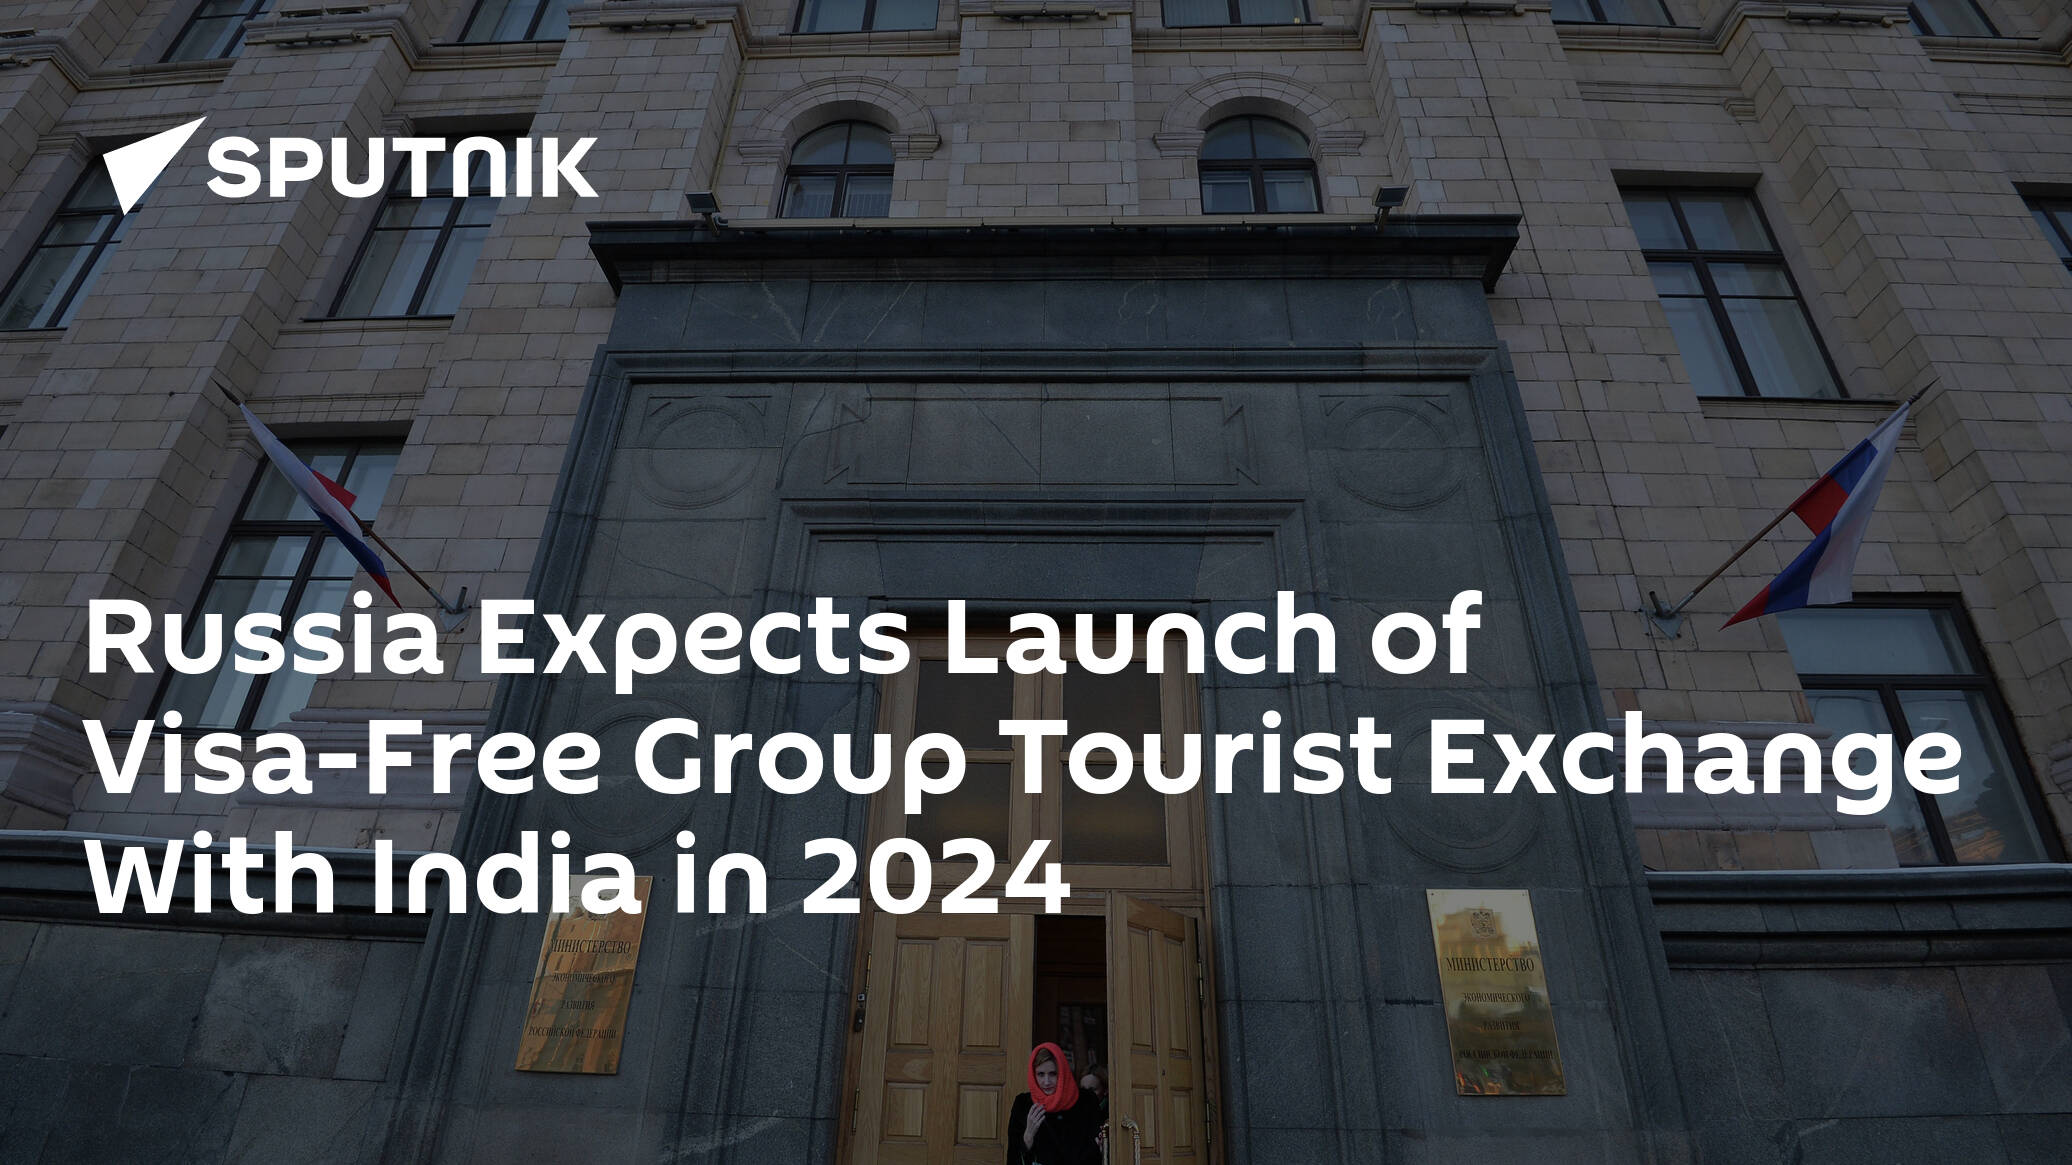 Russia Expects Launch of Visa-Free Group Tourist Exchange With India in 2024